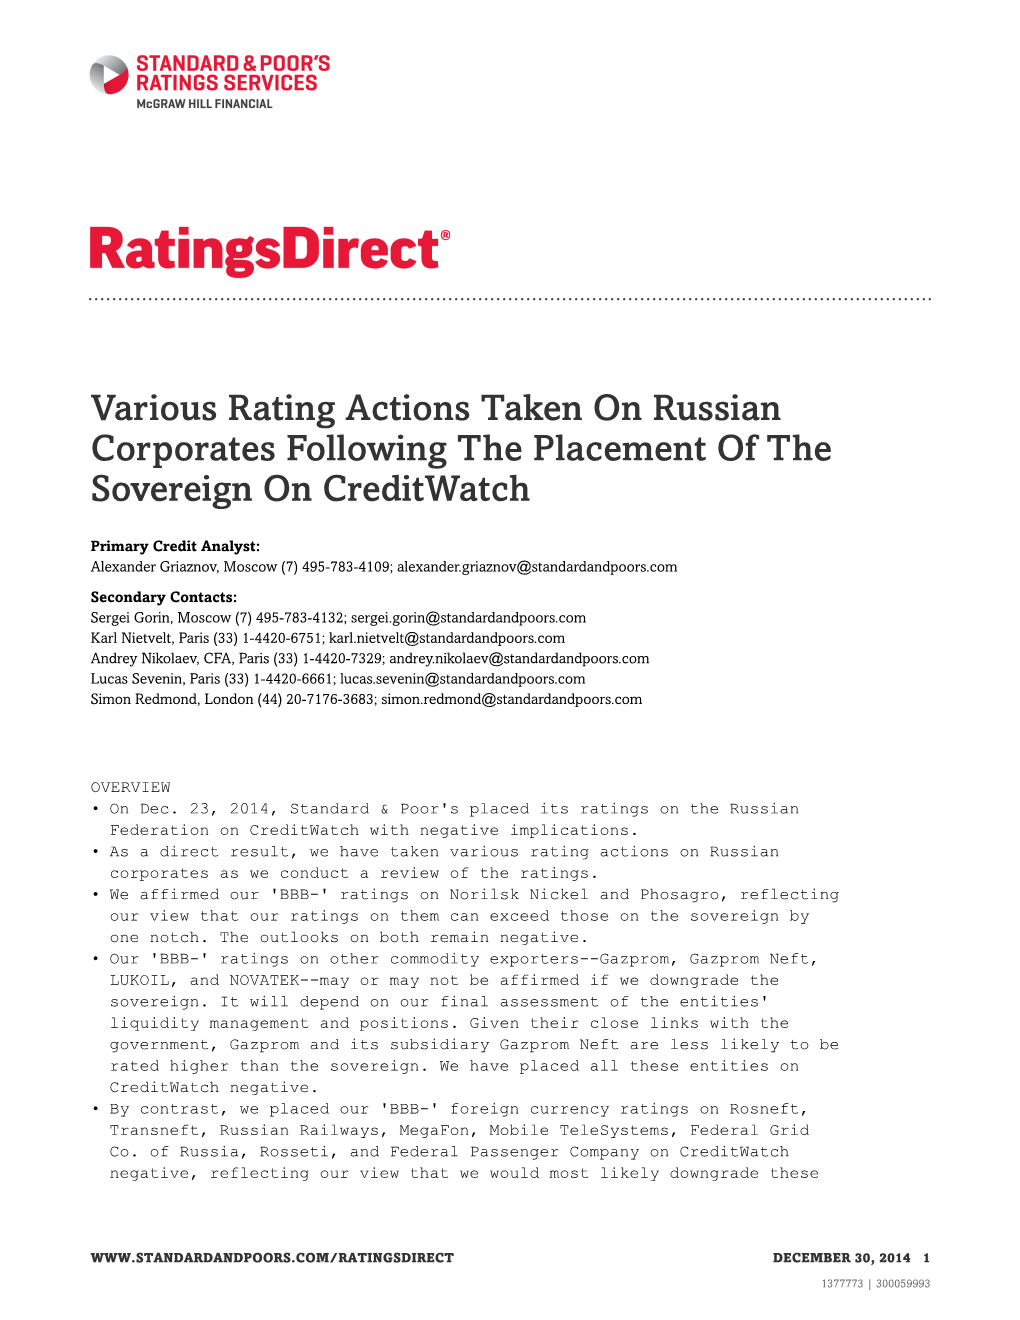 Various Rating Actions Taken on Russian Corporates Following the Placement of the Sovereign on Creditwatch